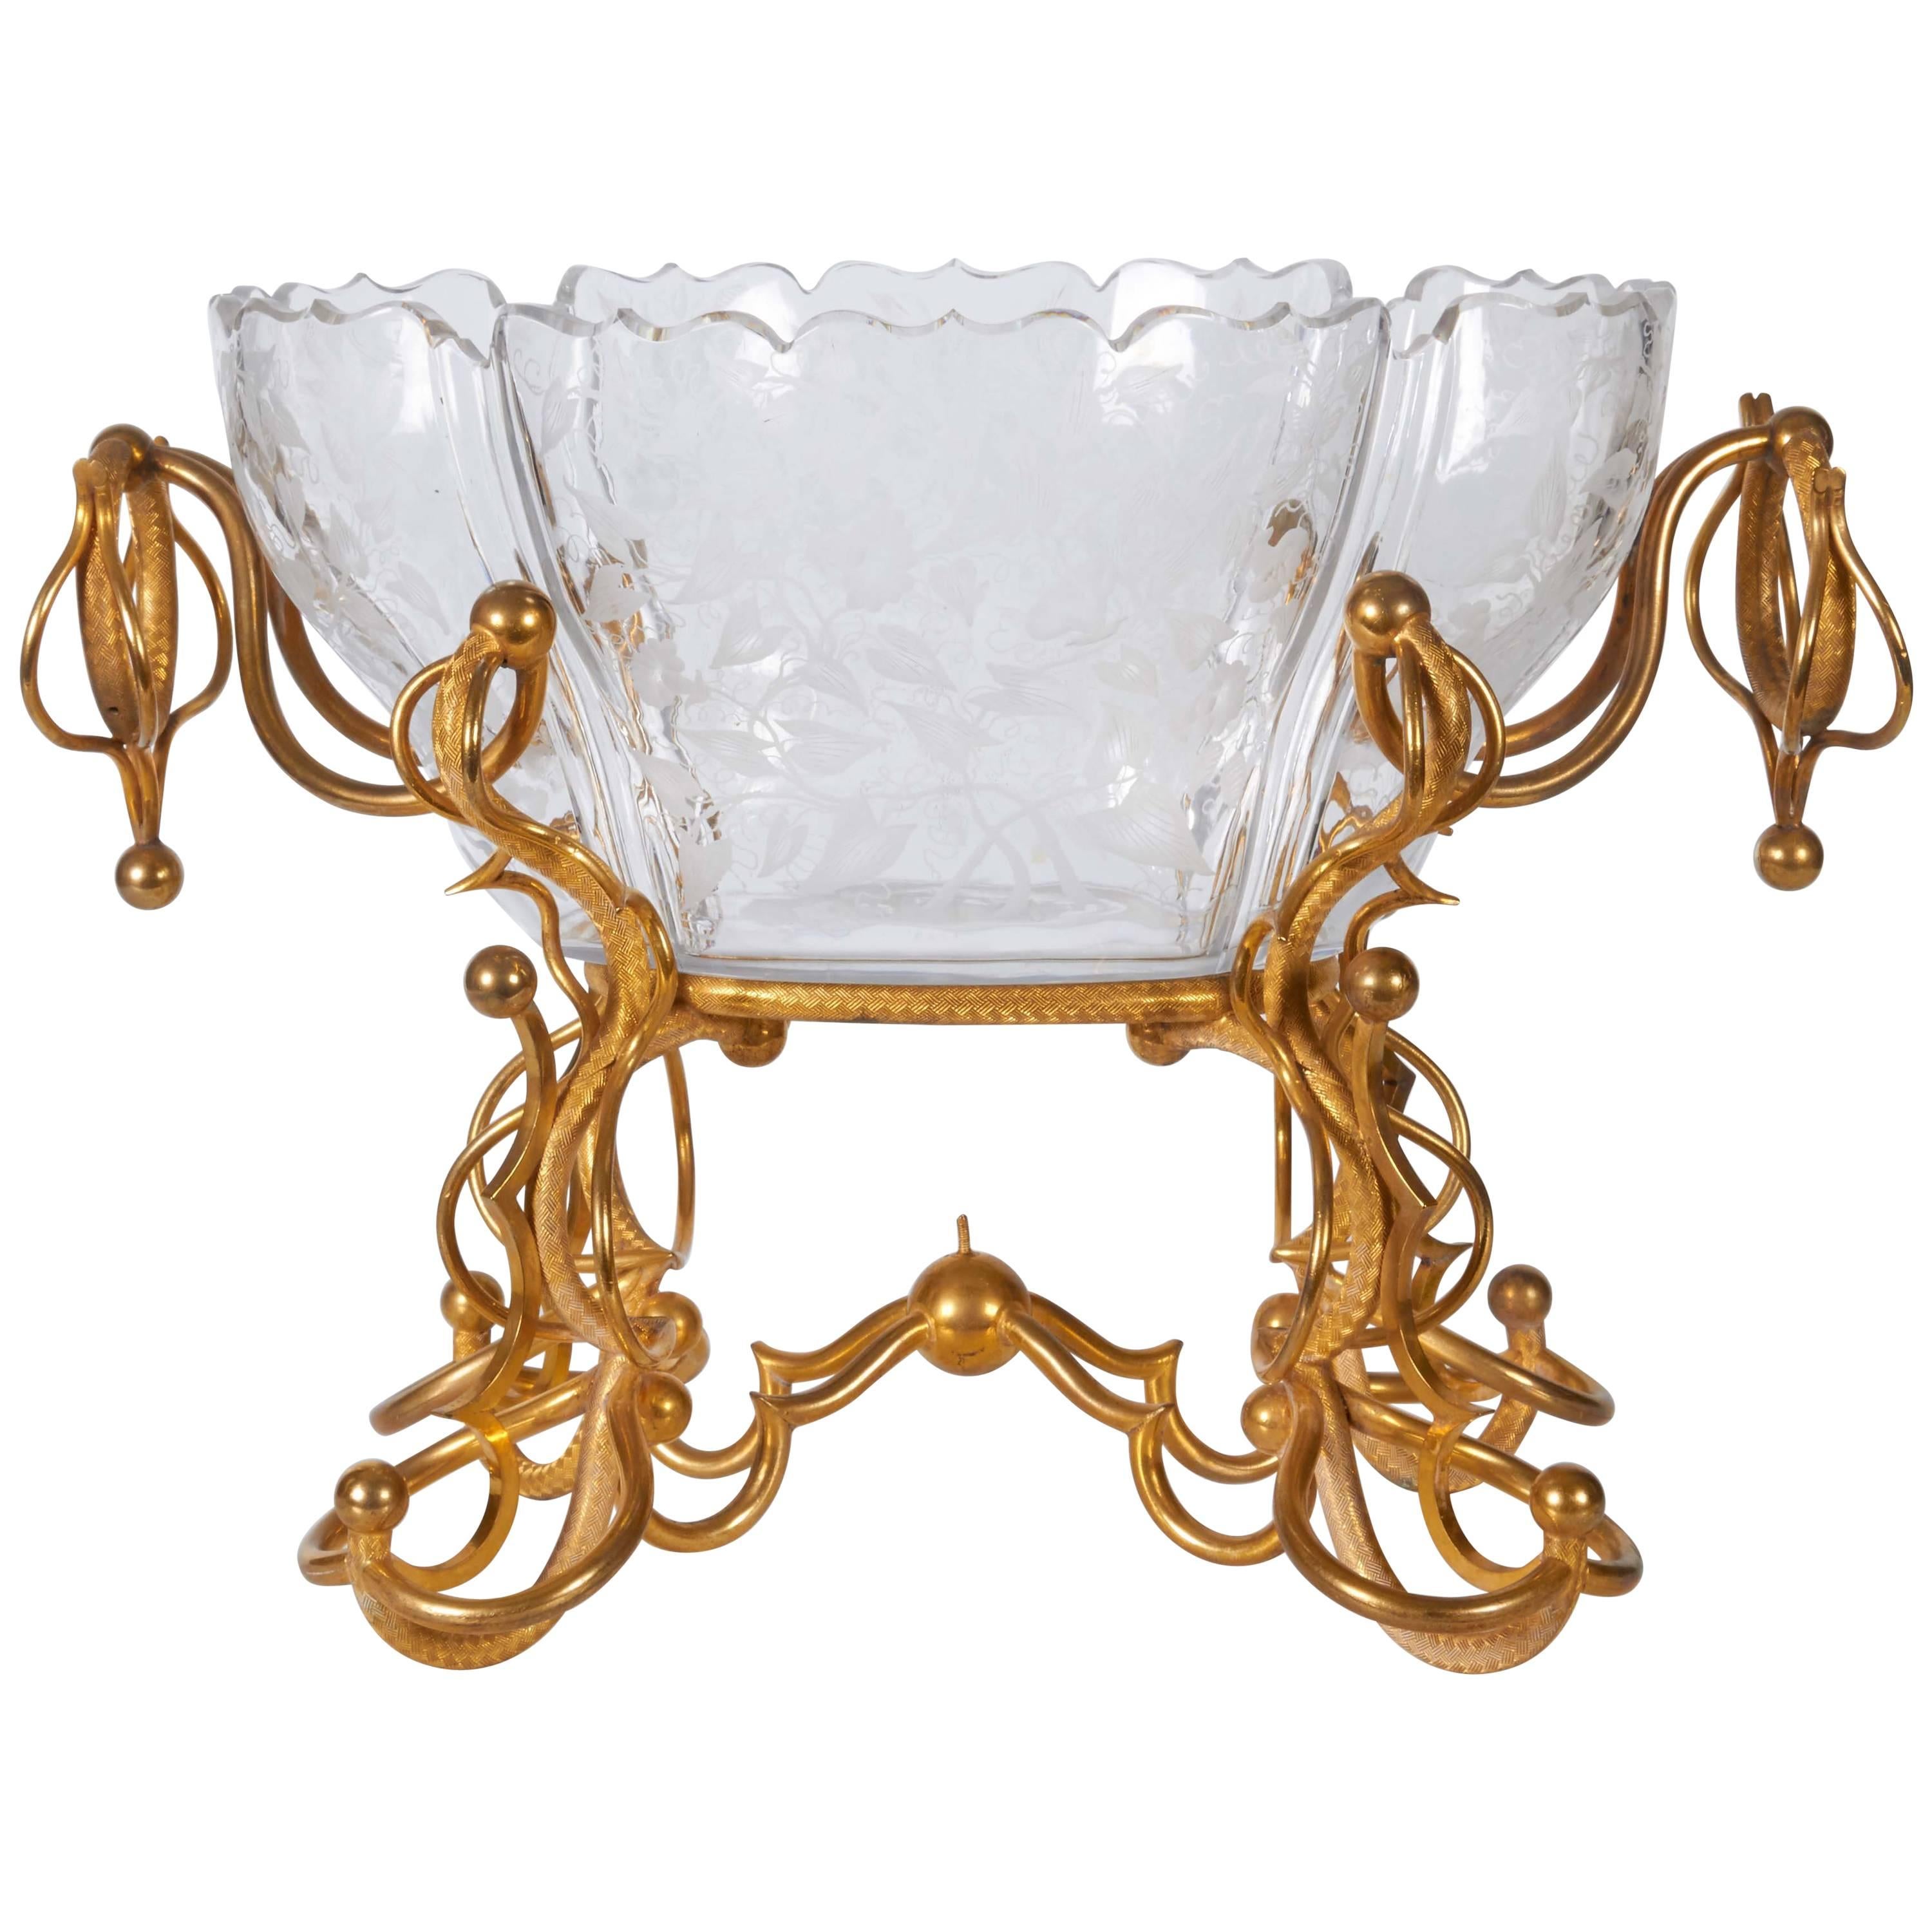 Baccarat Crystal and Dore Bronze-Mounted Centrepiece or Jardinière